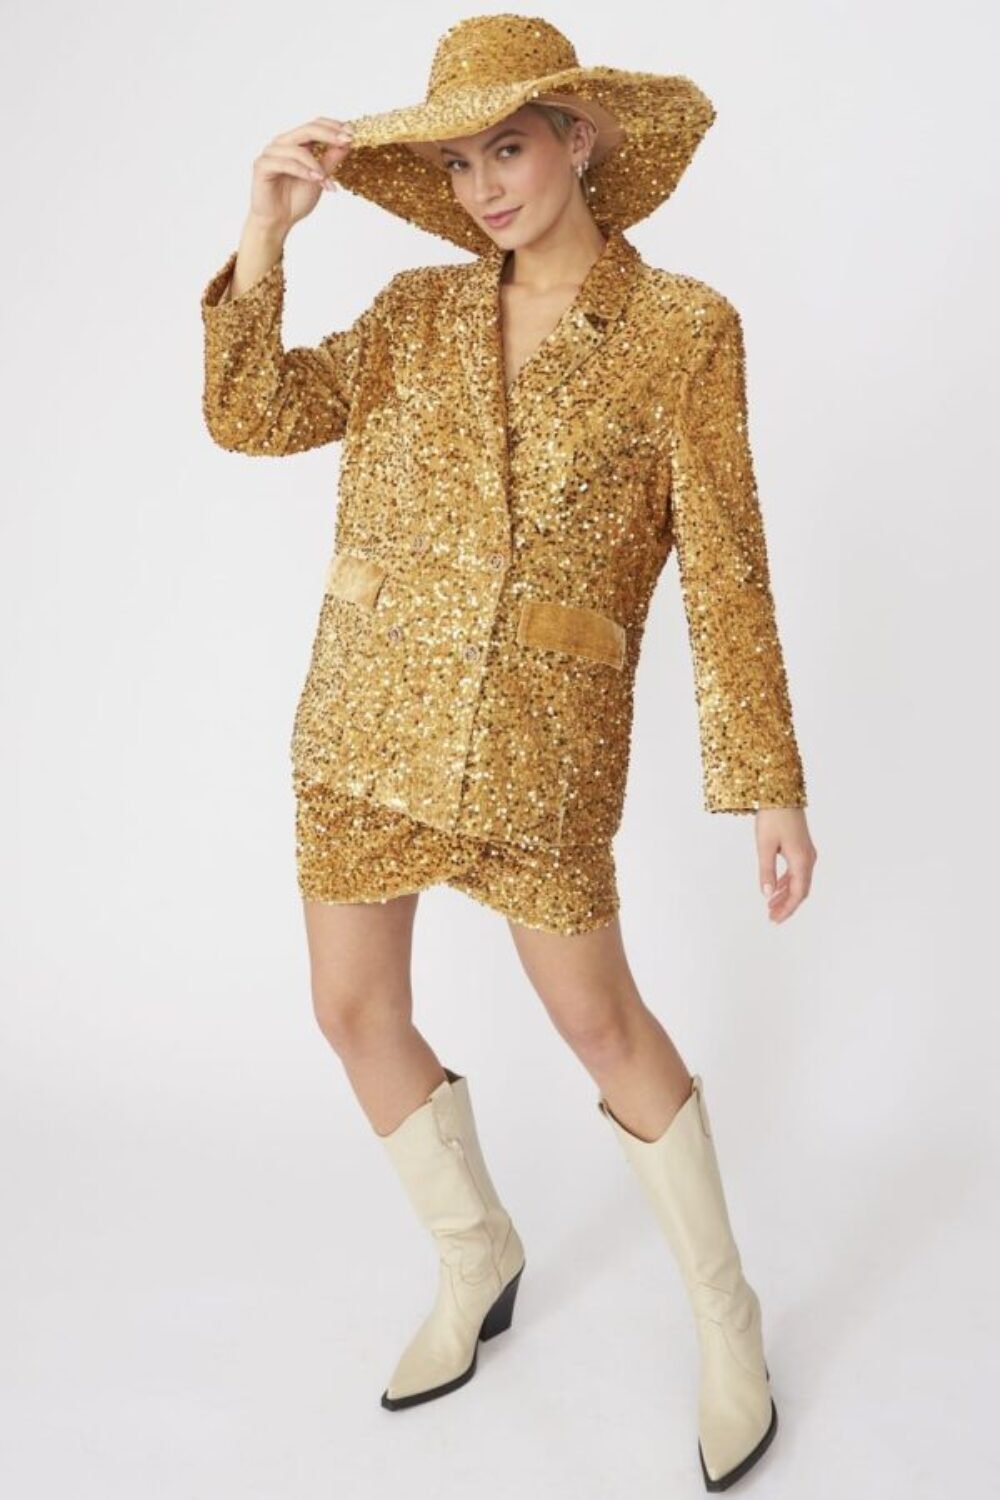 Shop Lux Gold Sequin and Velvet Blazer and women's luxury and designer clothes at www.lux-apparel.co.uk